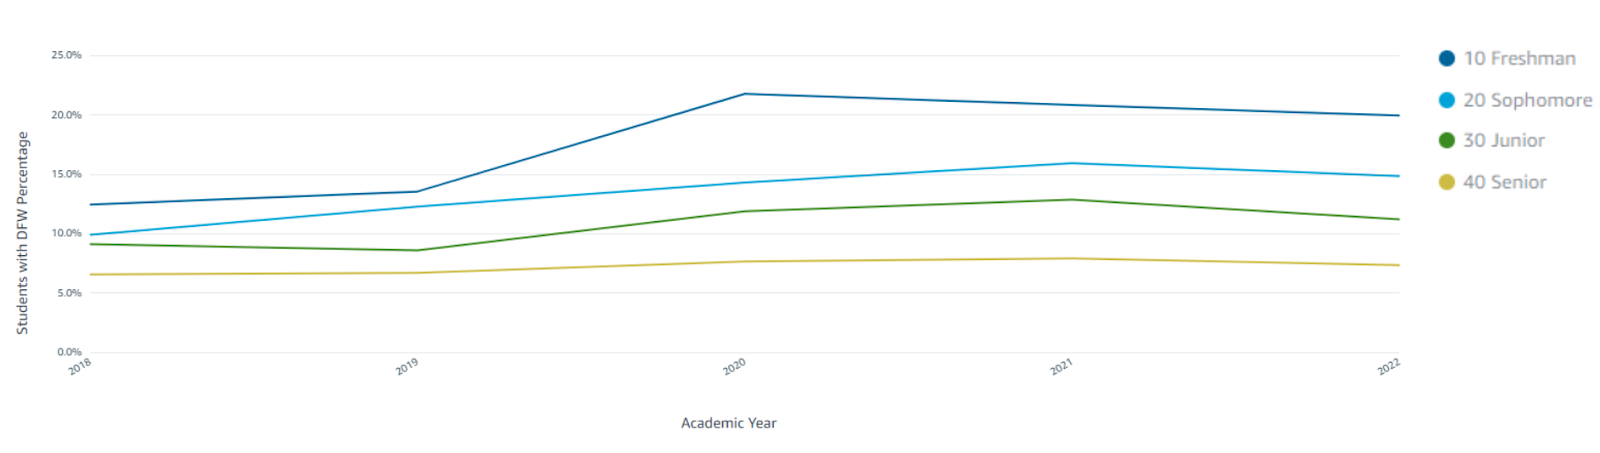 Academic Level Undergraduate DFW Rate Trend. See accessible data table below.